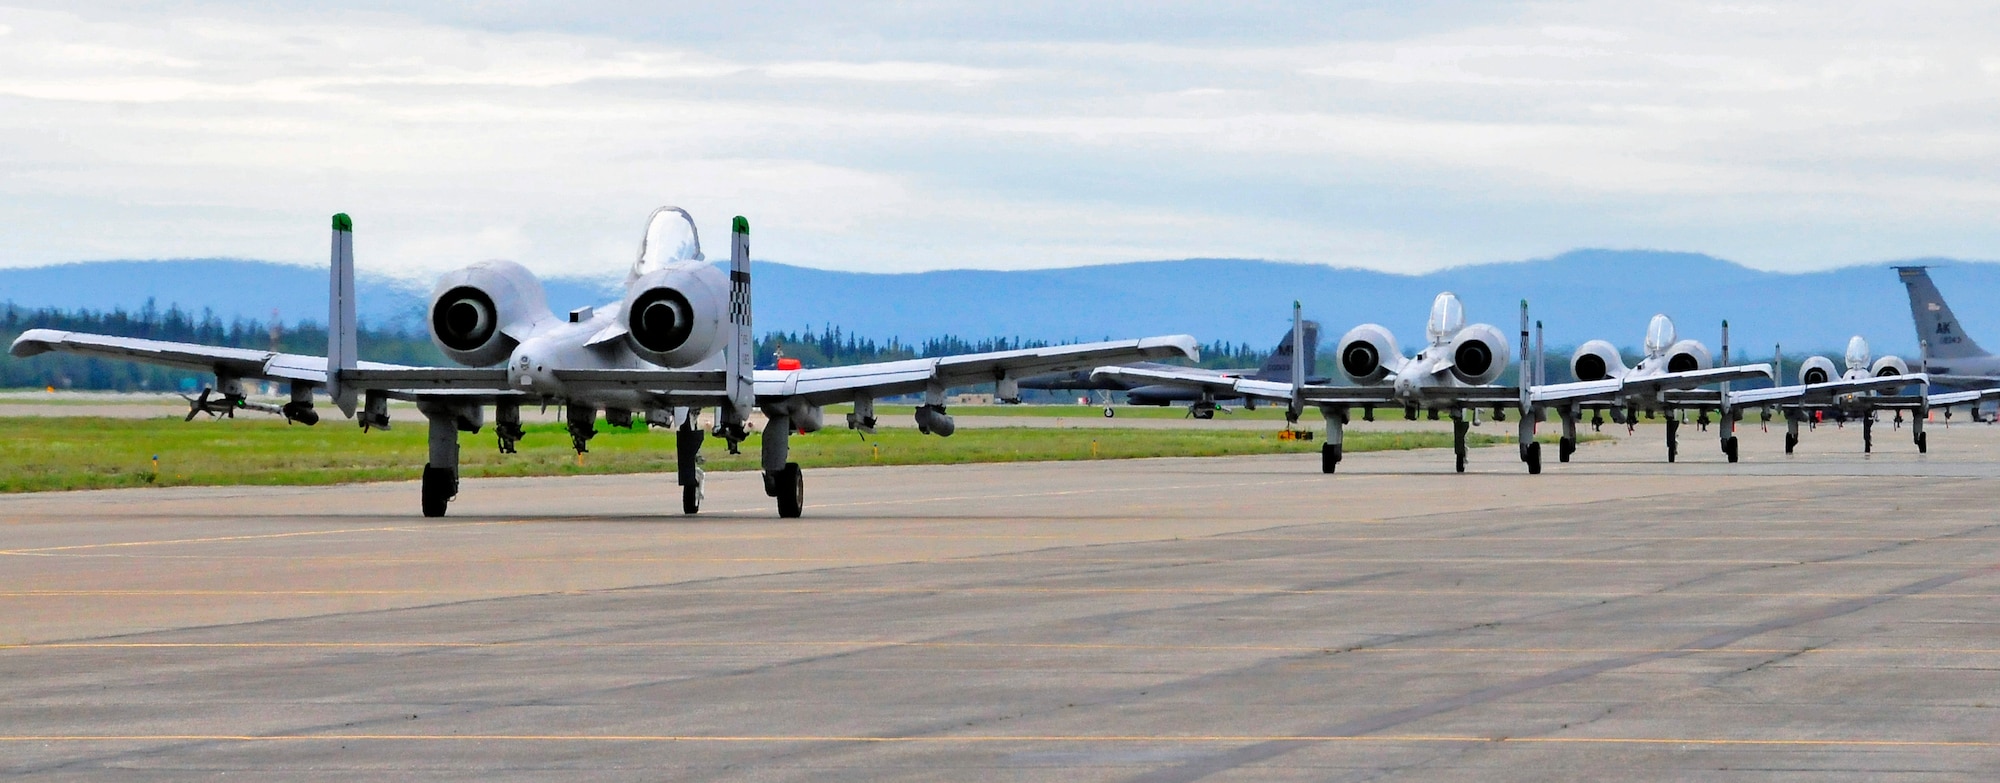 Several A-10 Thunderbolt IIs taxi out for a training mission July 15, 2011, Eielson Air Force Base, Alaska.  During RF-A 11-2, the 25th Fighter Squadron from Osan Air Base, Republic of Korea took advantage of operating in the 67,000-square-mile Joint Pacific Alaska Range Complex and learned valuable lessons that can be applied in combat. The 25th FS A-10 pilots strive to stay proficient in providing close-air support in combat by taking advantage of the Joint Pacific Alaska Range Complex, which provides the means to engage in air to ground maneuvers and expend numerous inert and live weapons. (U.S. Air Force photo by/Staff Sgt. Miguel Lara III)